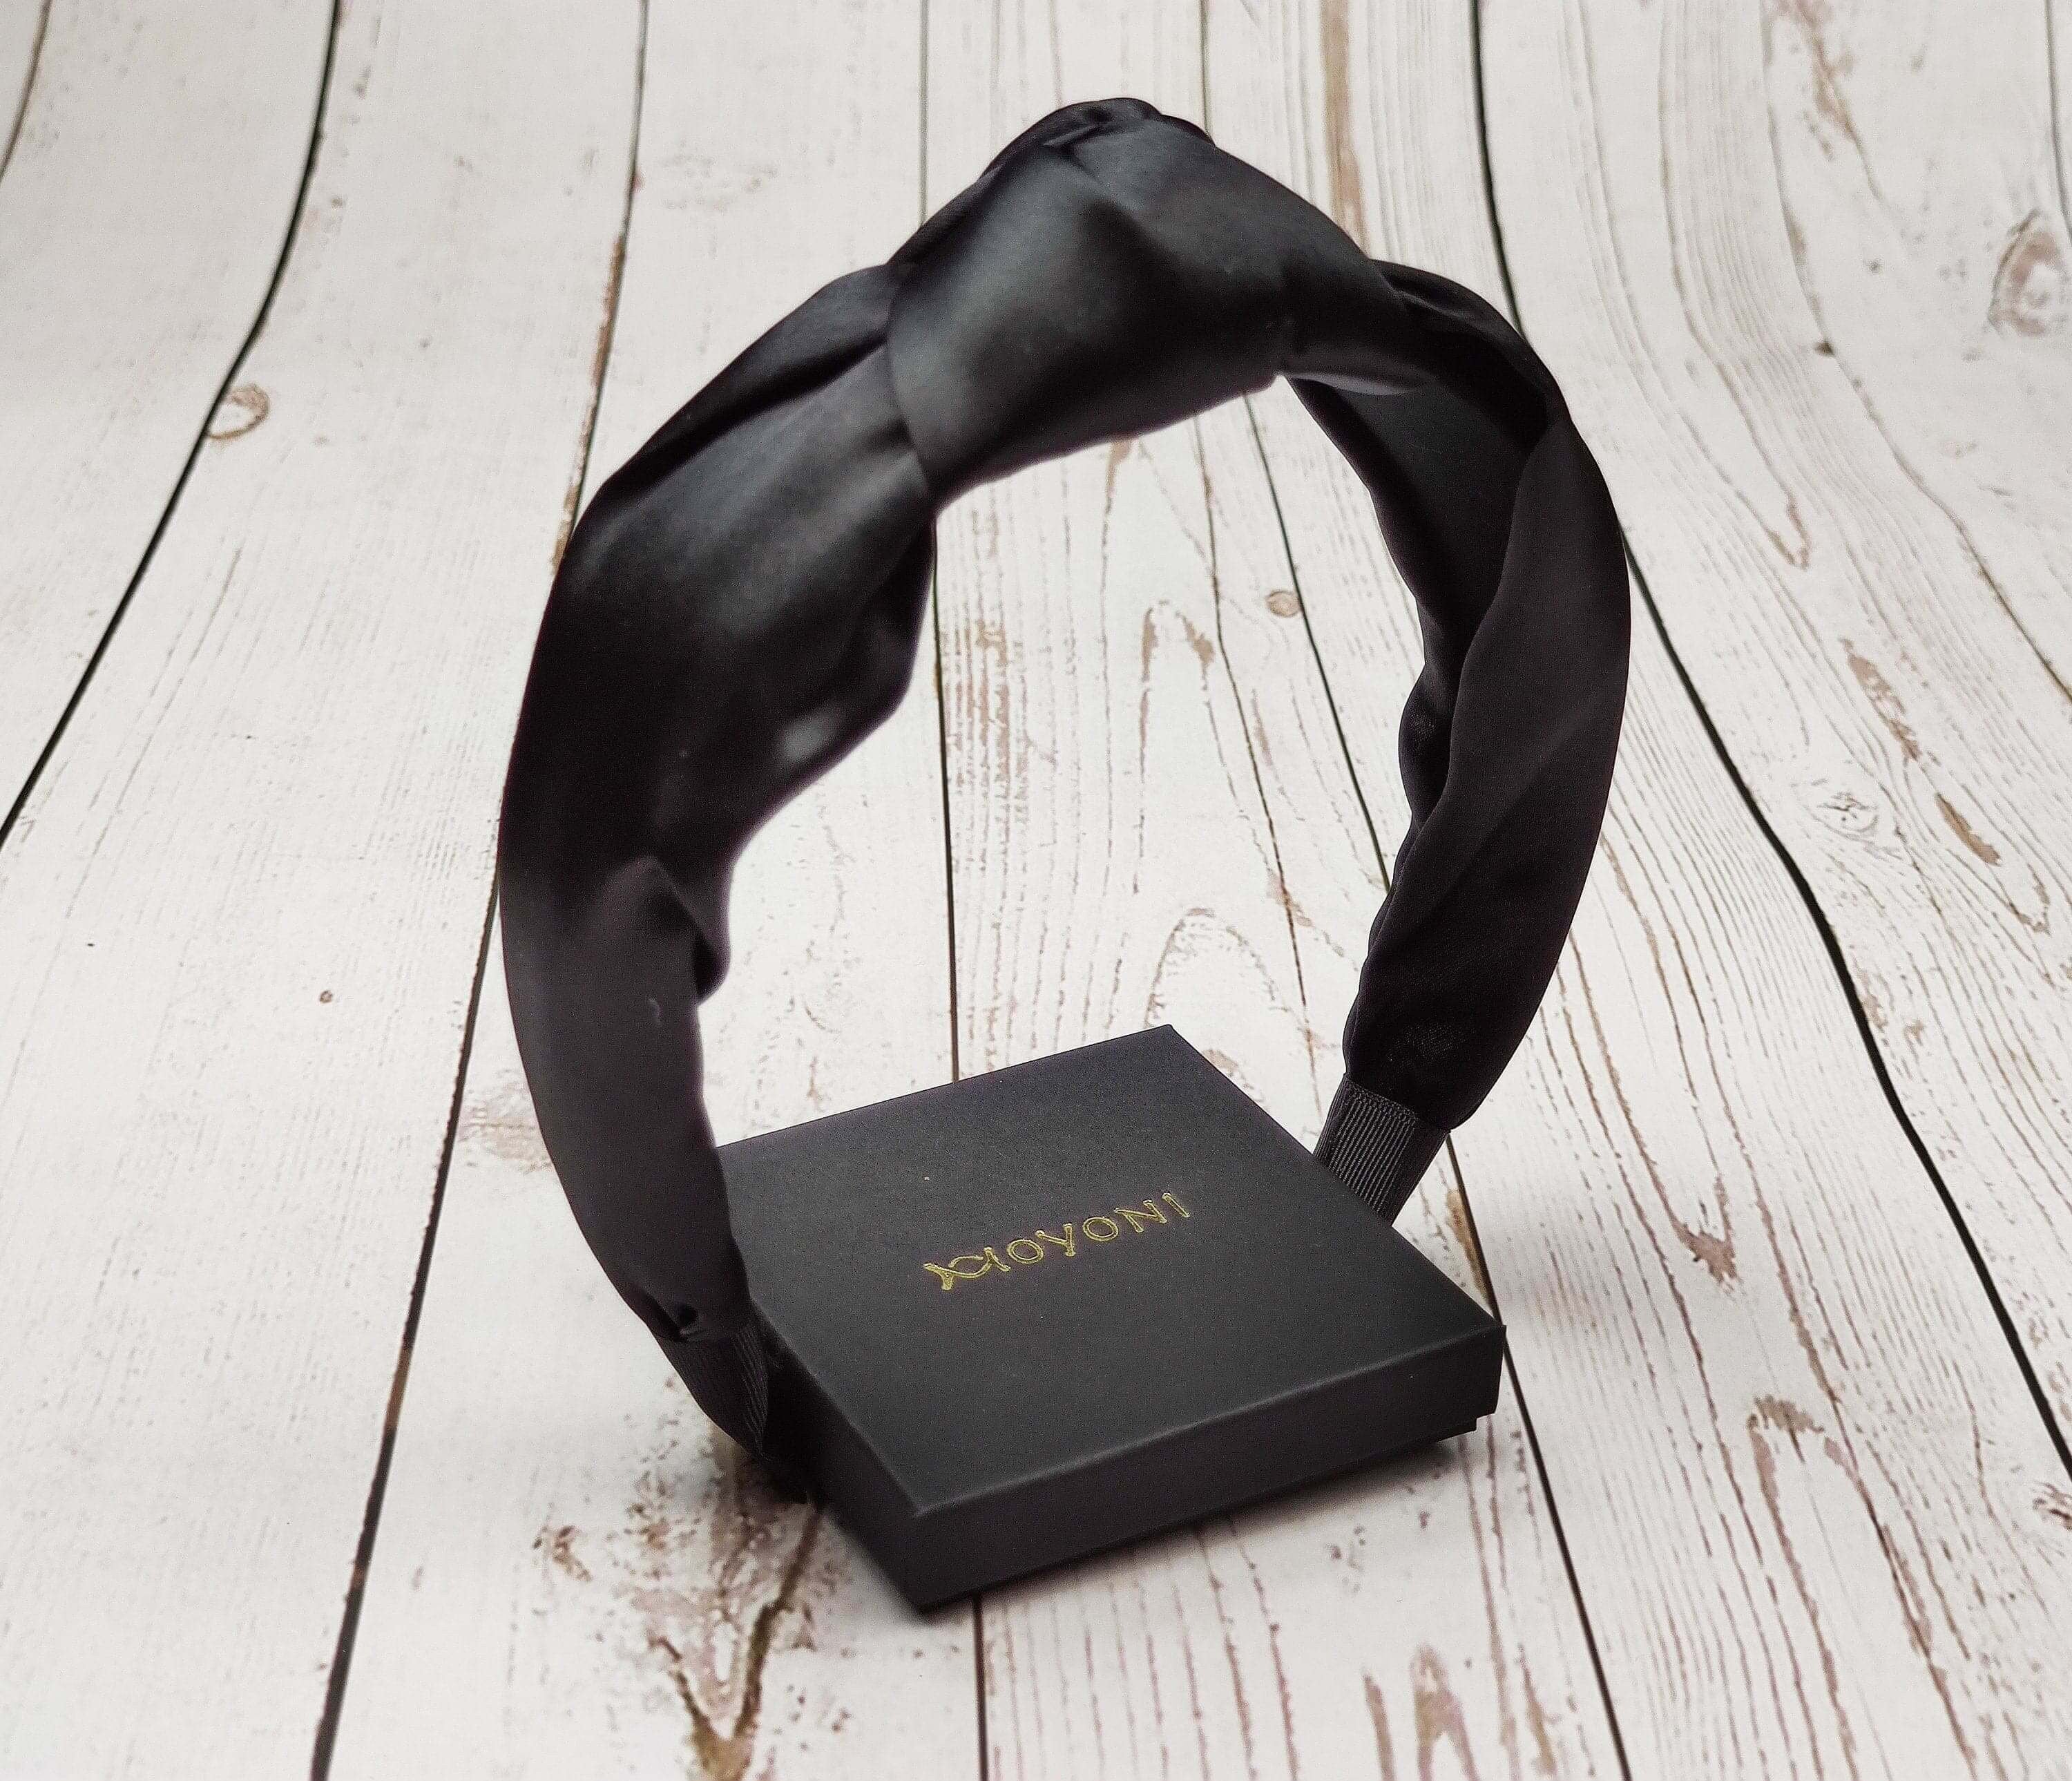 The perfect accessory for any hairstyle: a stylish black satin knotted headband.